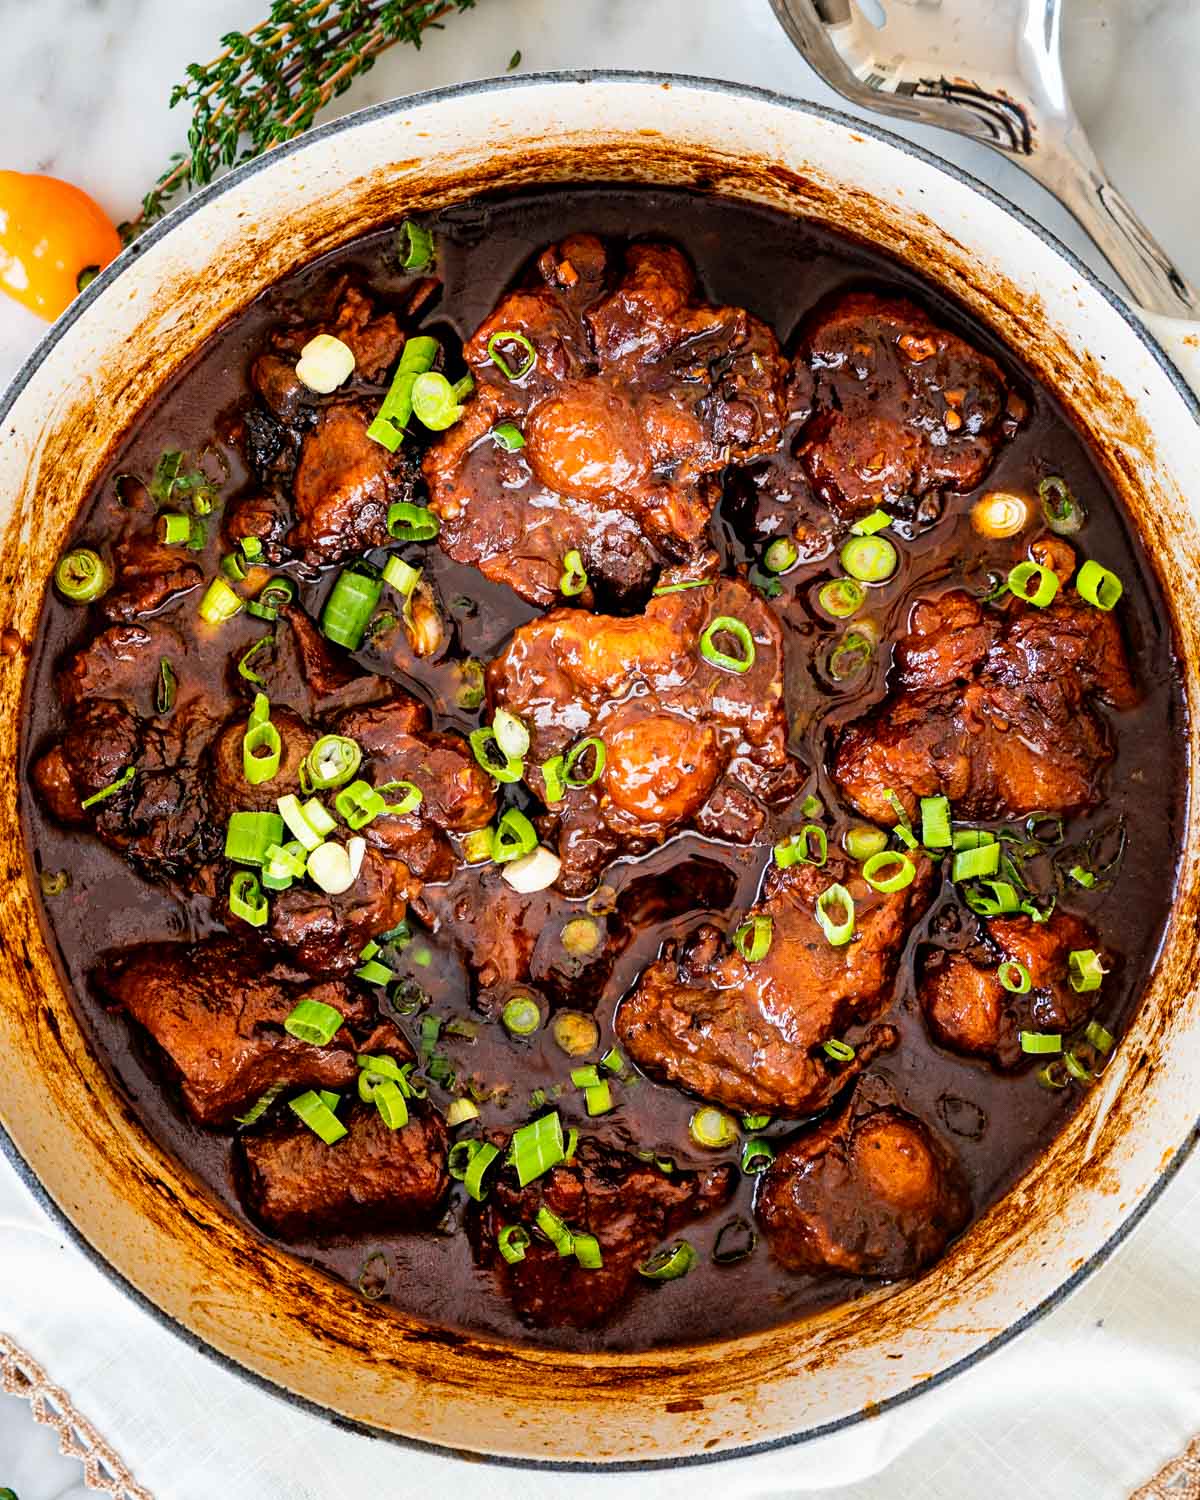 Aerial shot of a pot full of oxtail stew garnished with green onions